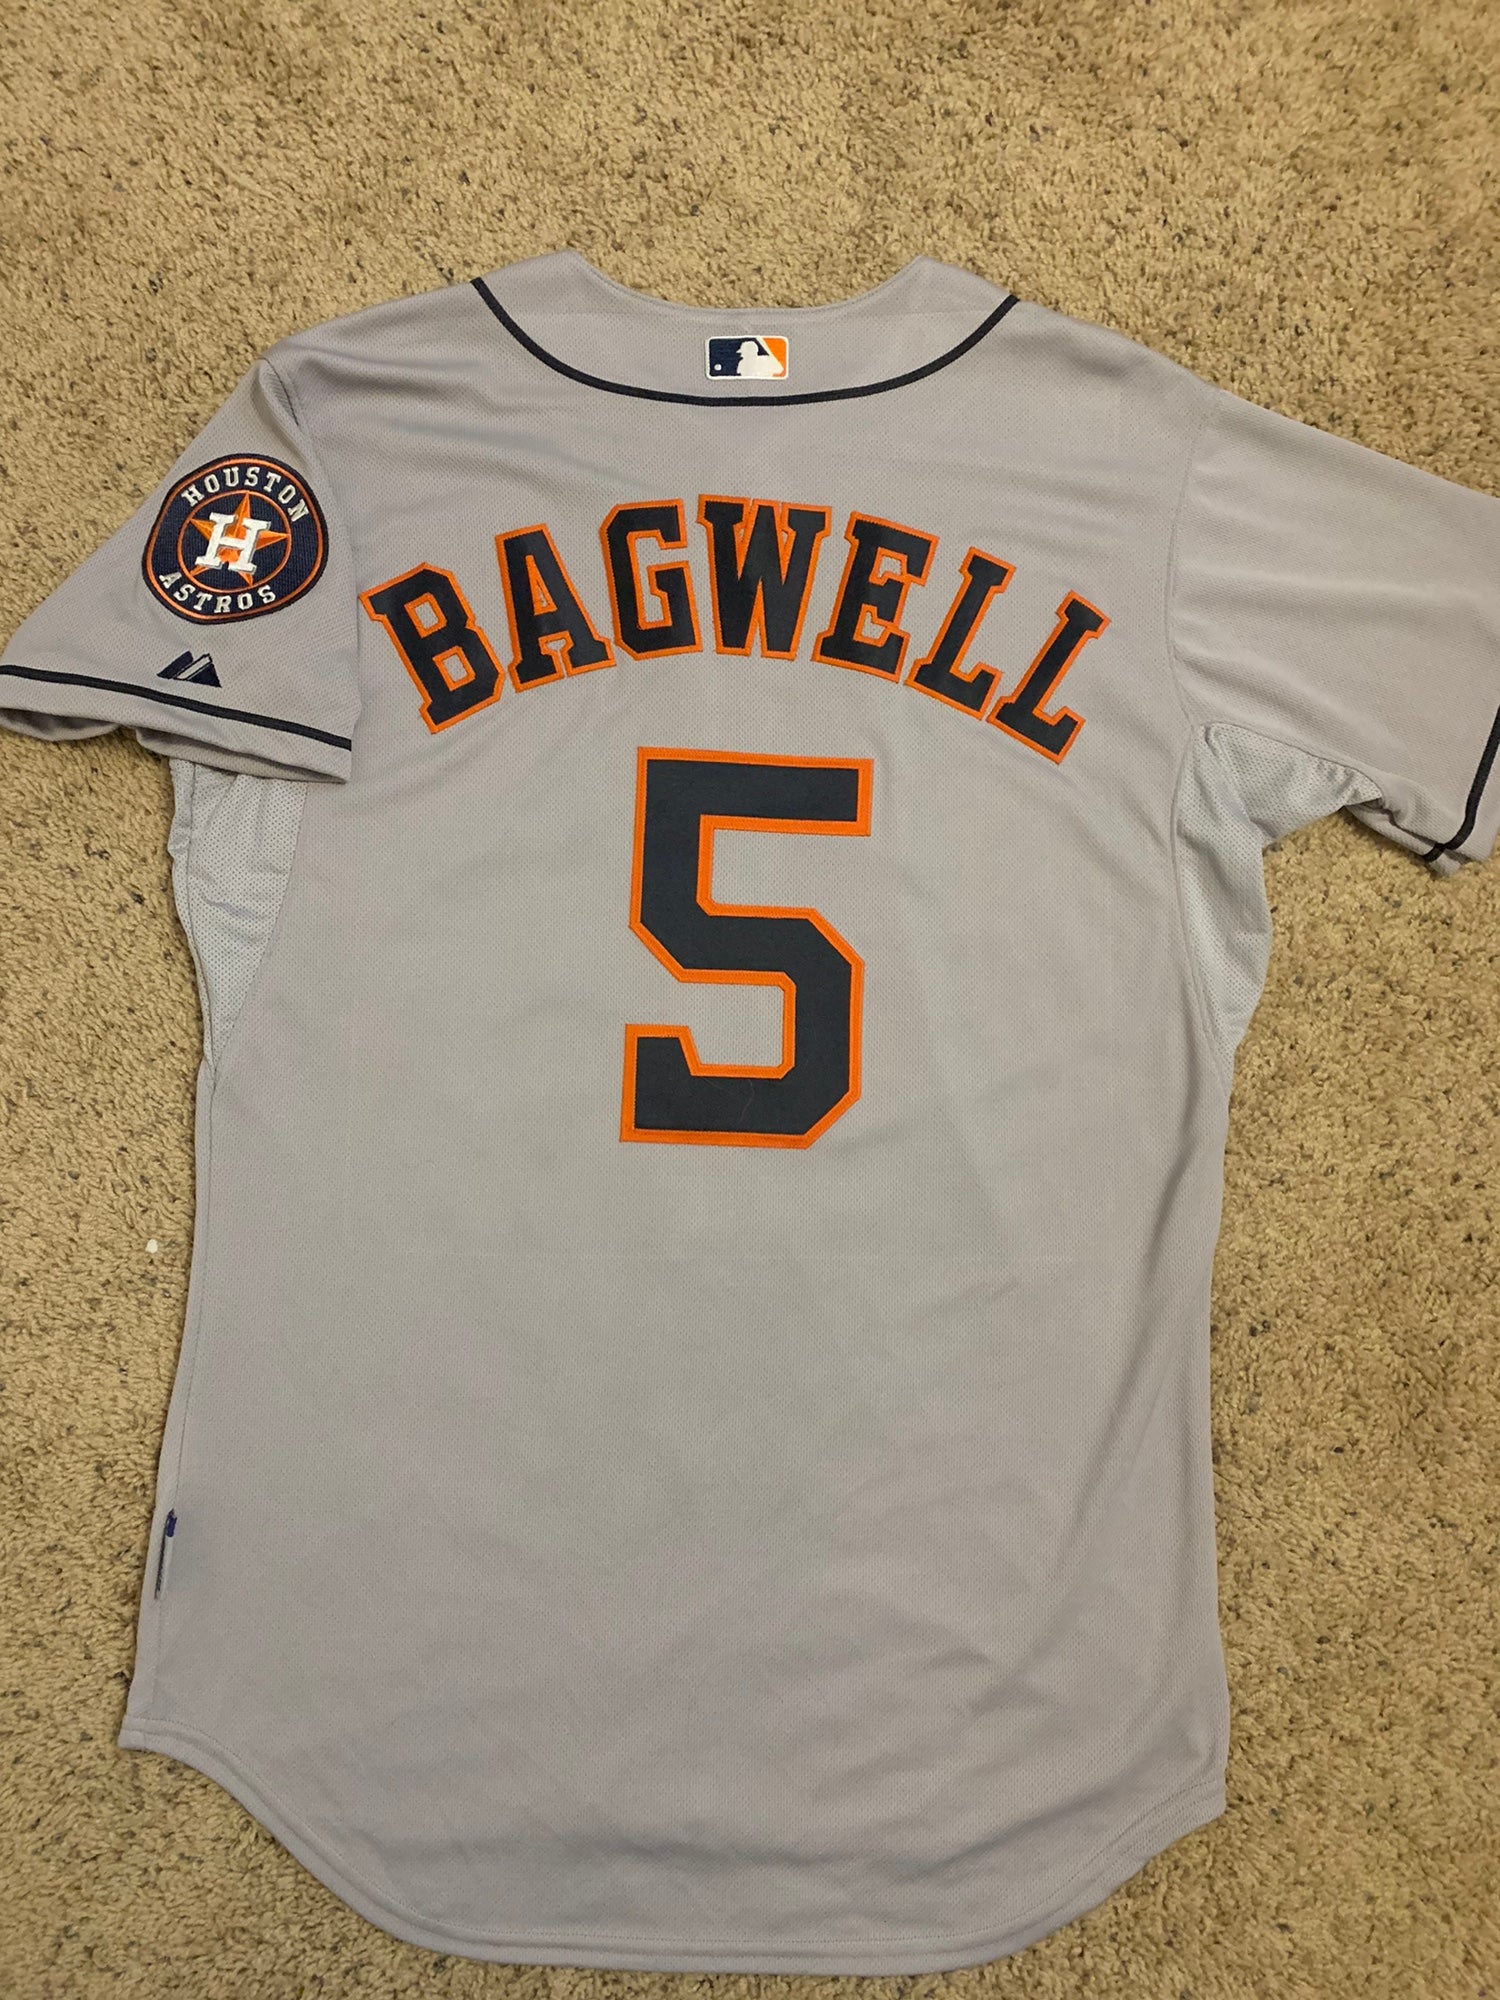 Majestic, Shirts, Houston Astros Bagwell27 Coopertown Jersey